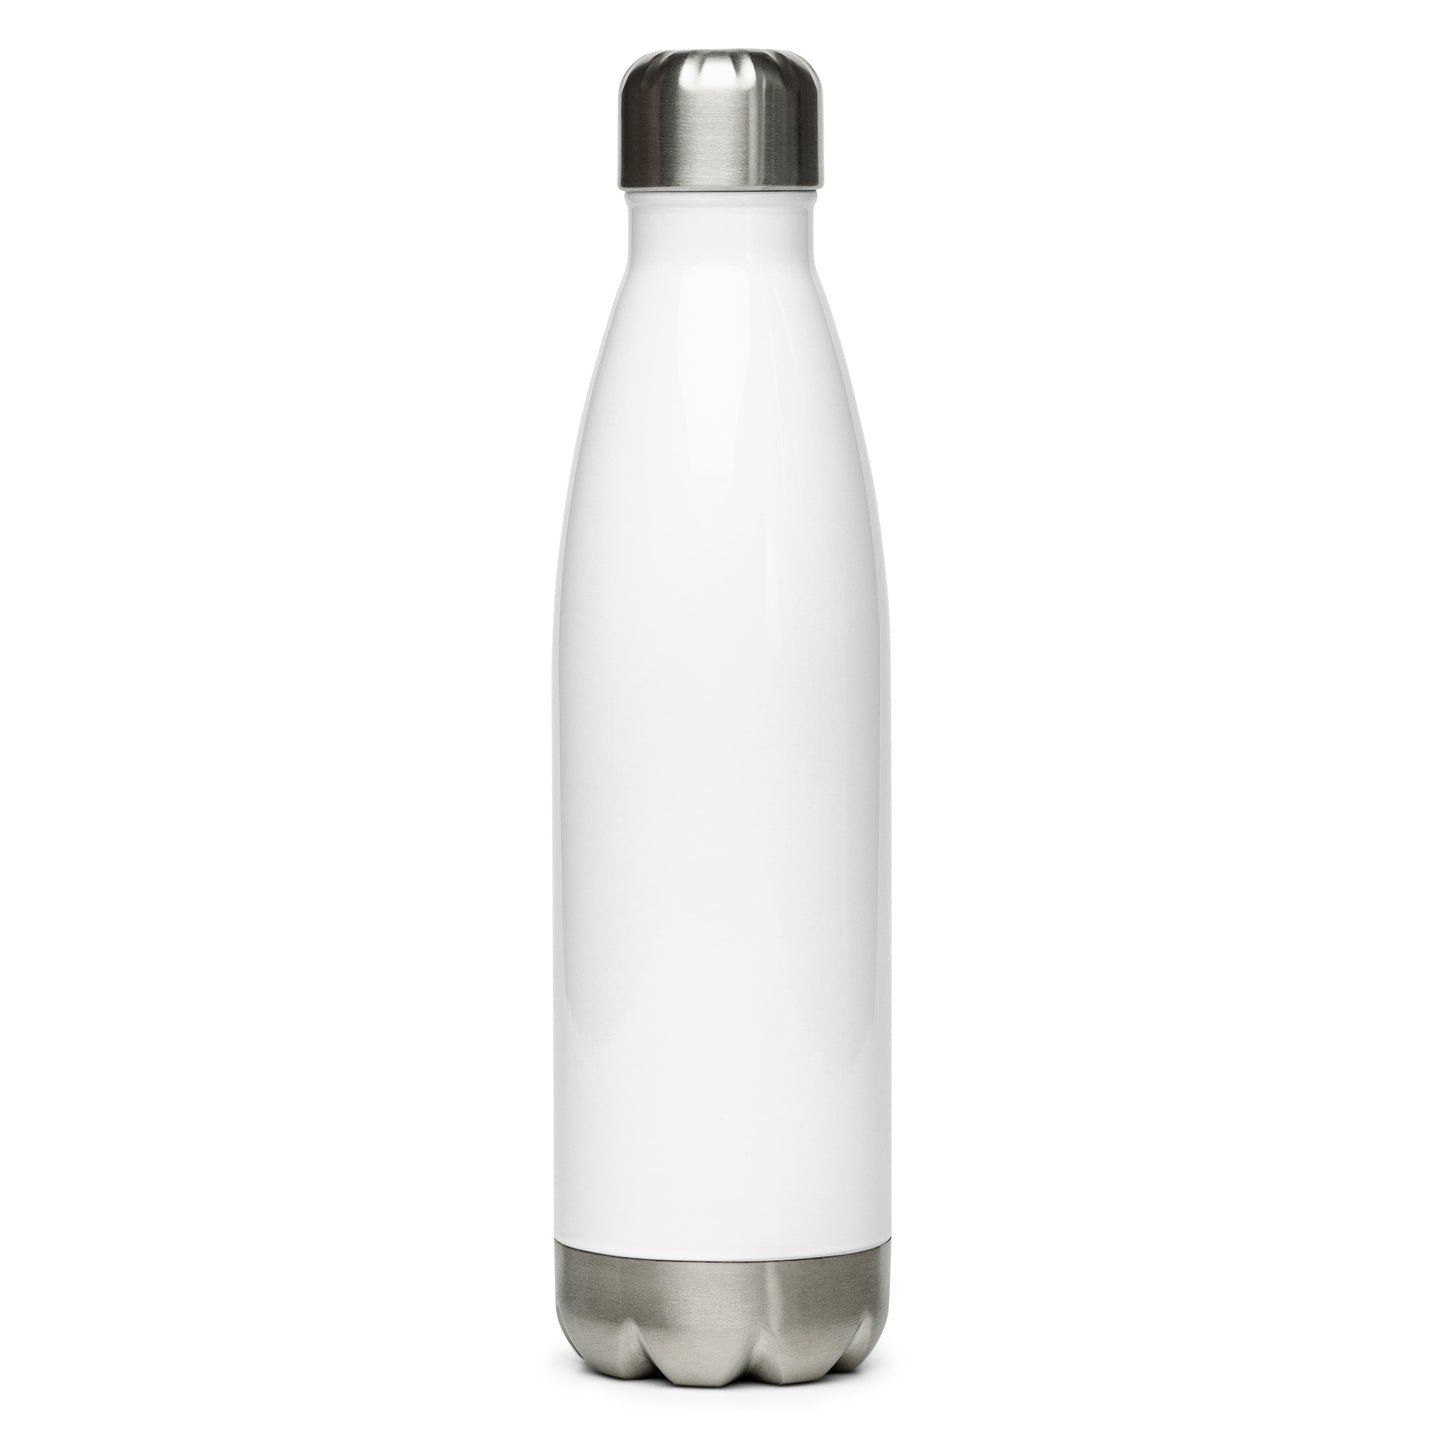 Base Camp Amelia Island Stainless Steel Water Bottle